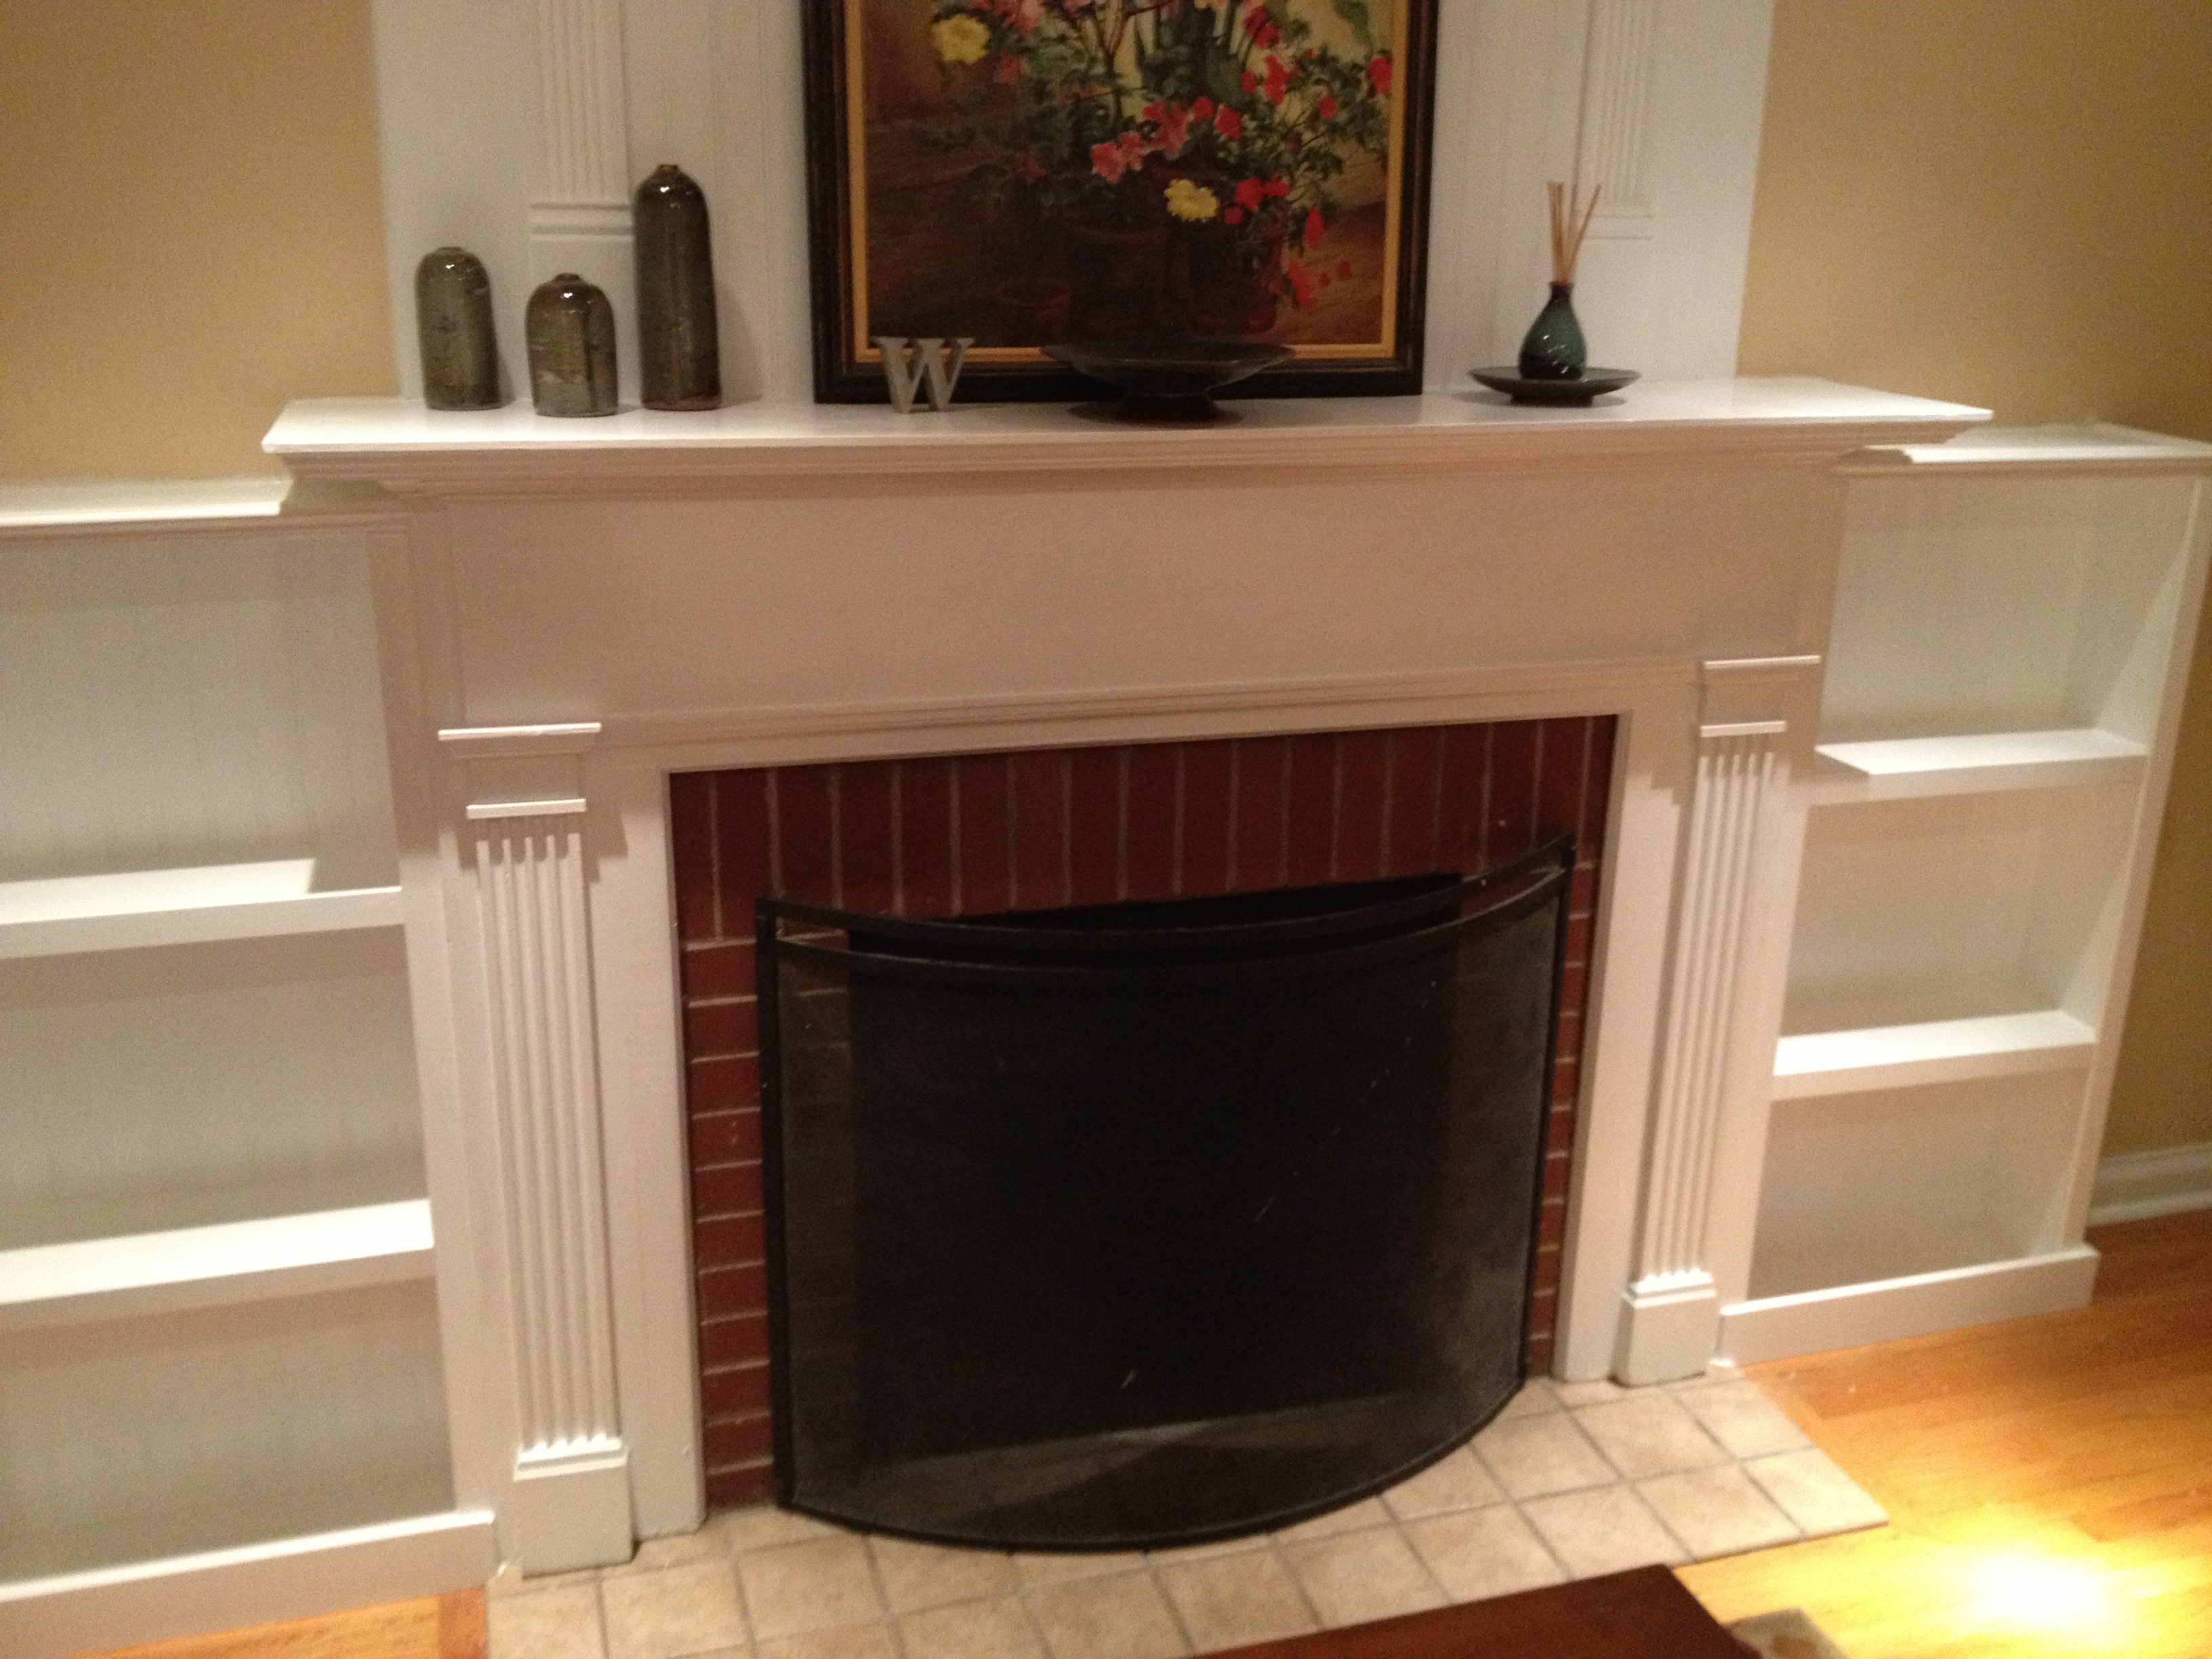 Fireplace Facelift Built-In Bookcases | Do It Yourself Home Projects 